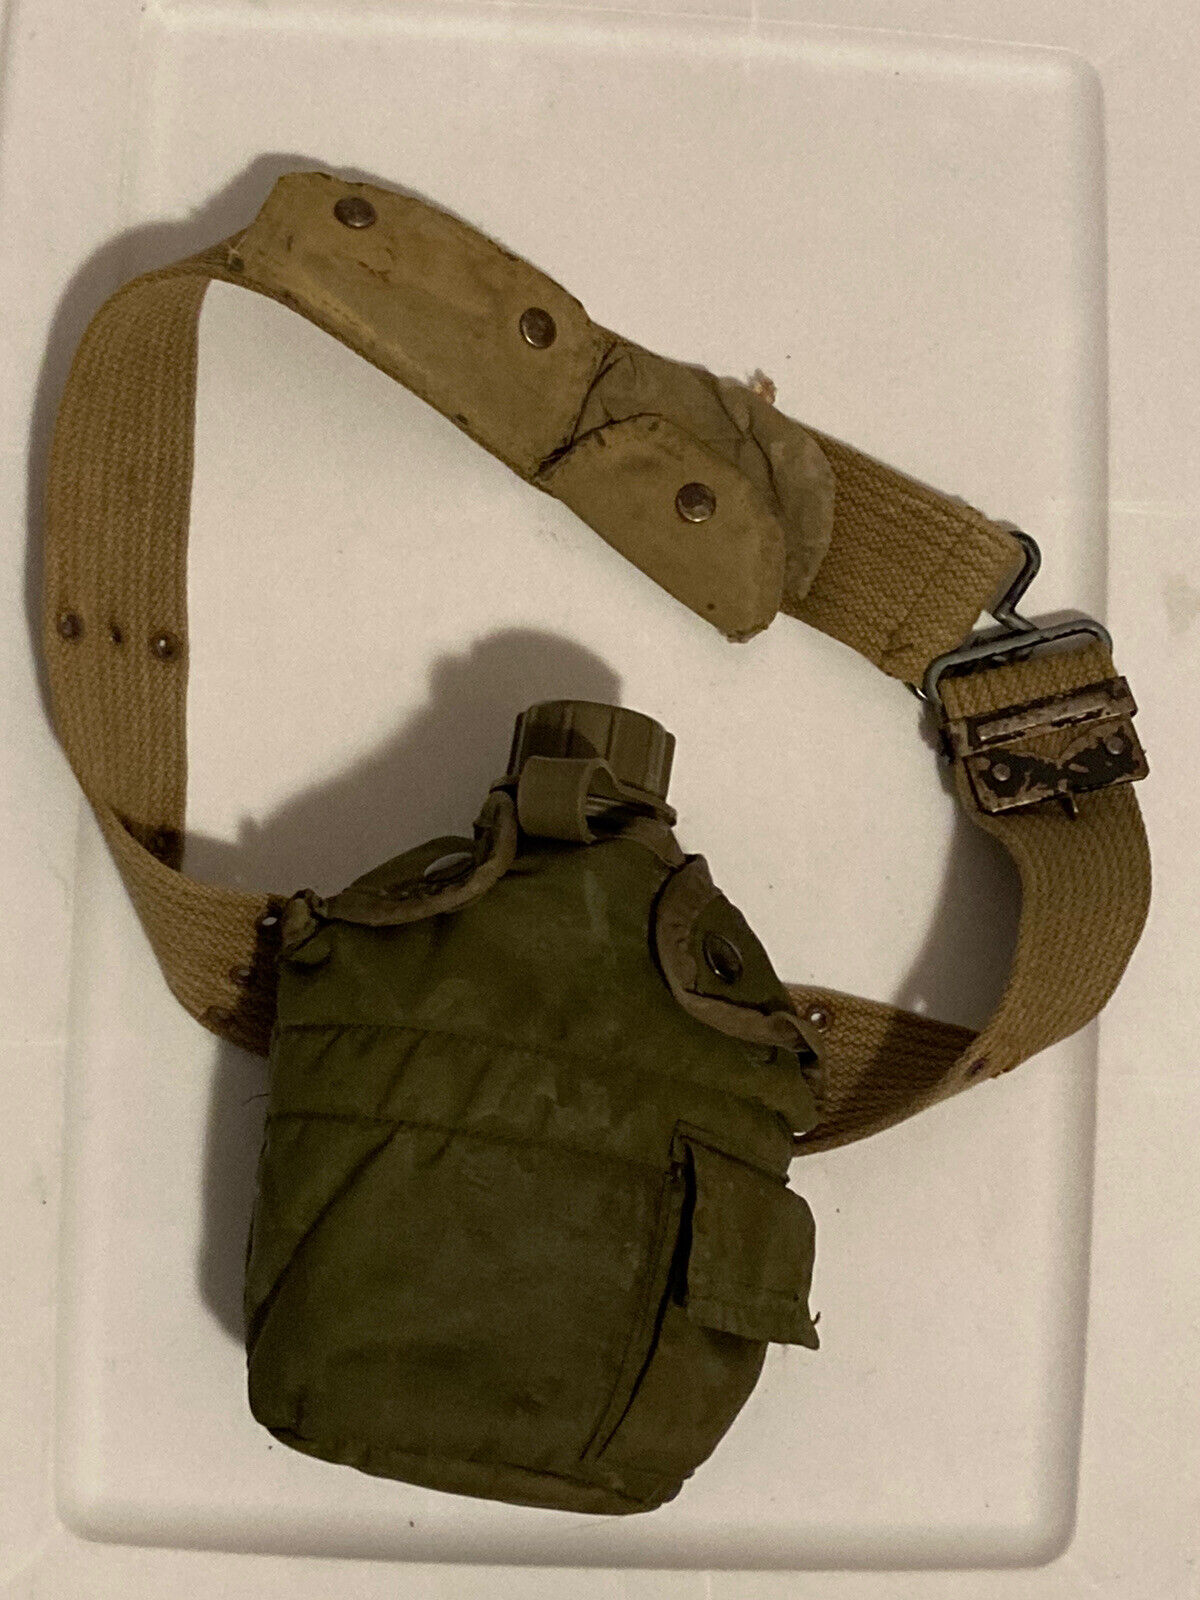 Vintage US Army Canteen and Utility Web Belt